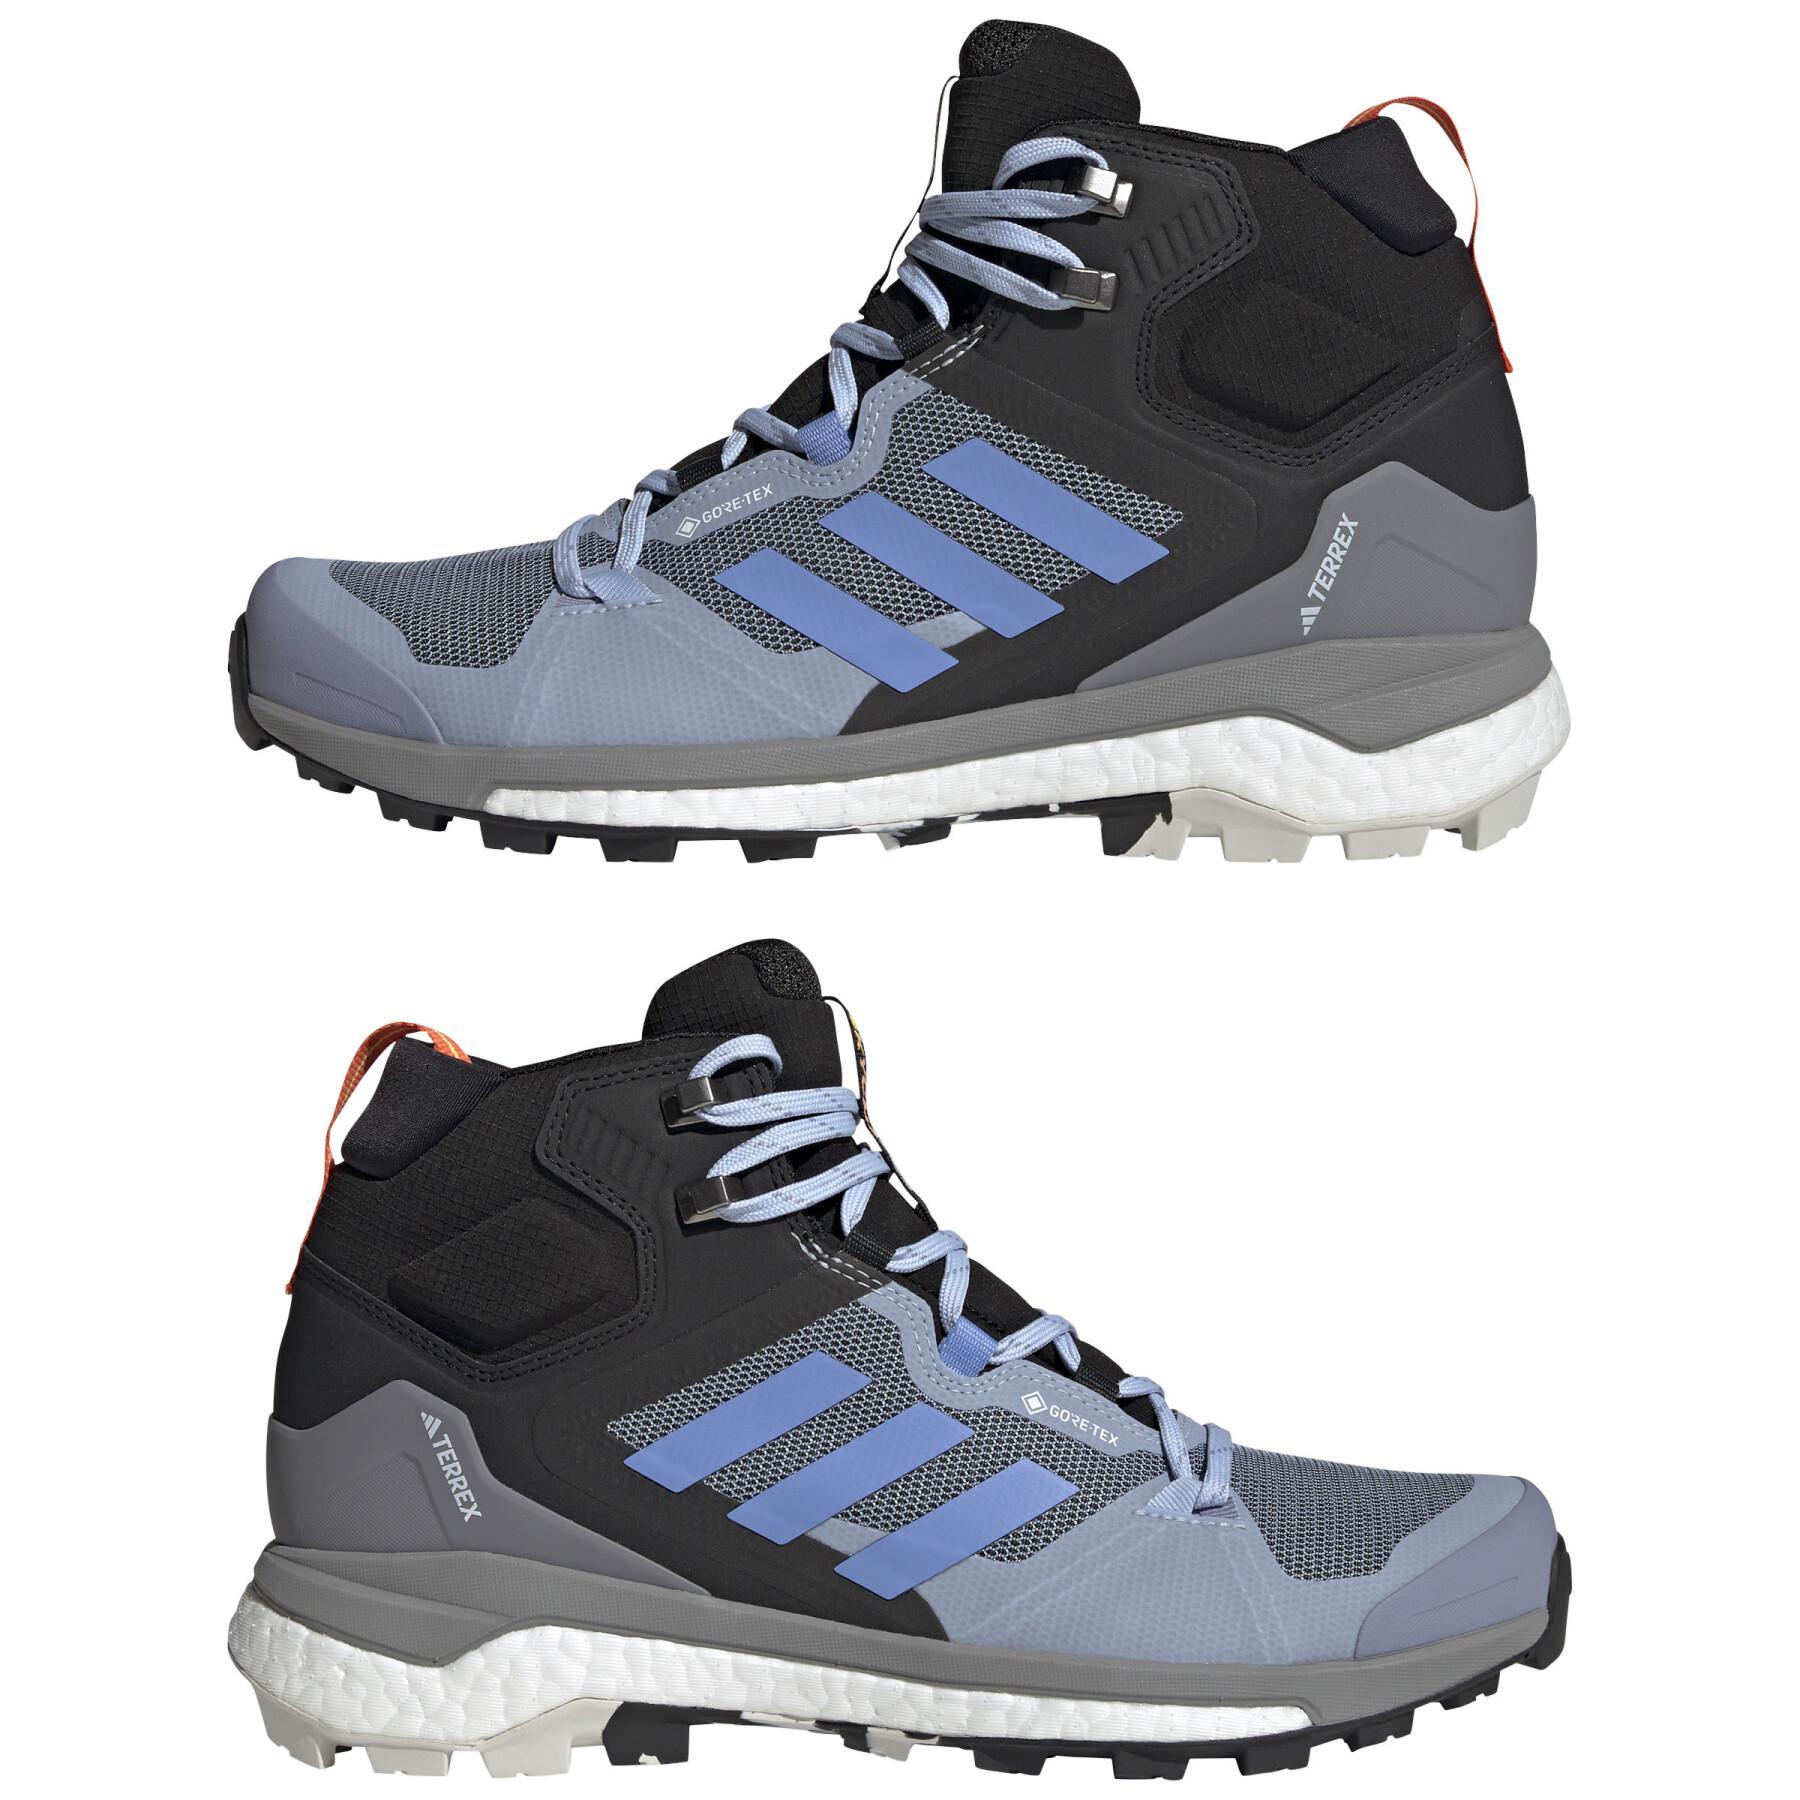 Mid hiking shoes for children adidas Terrex Skychaser Gore-Tex 2.0